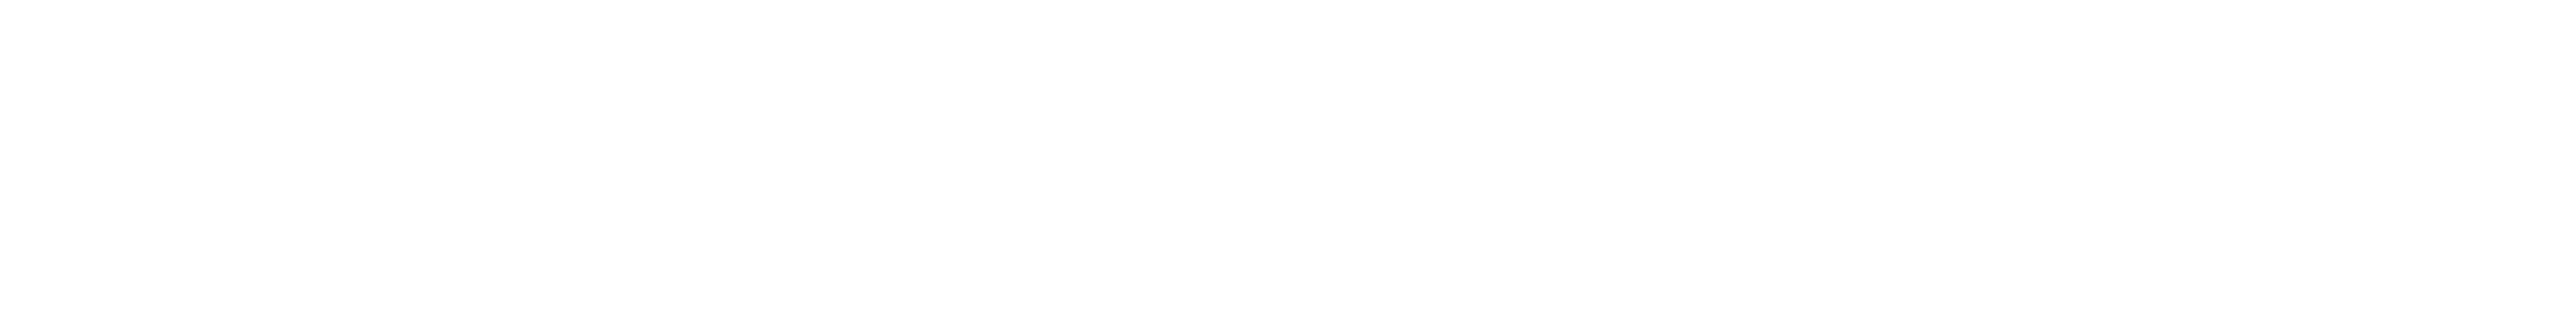 Africa Prize for Engineering Innovation logo white